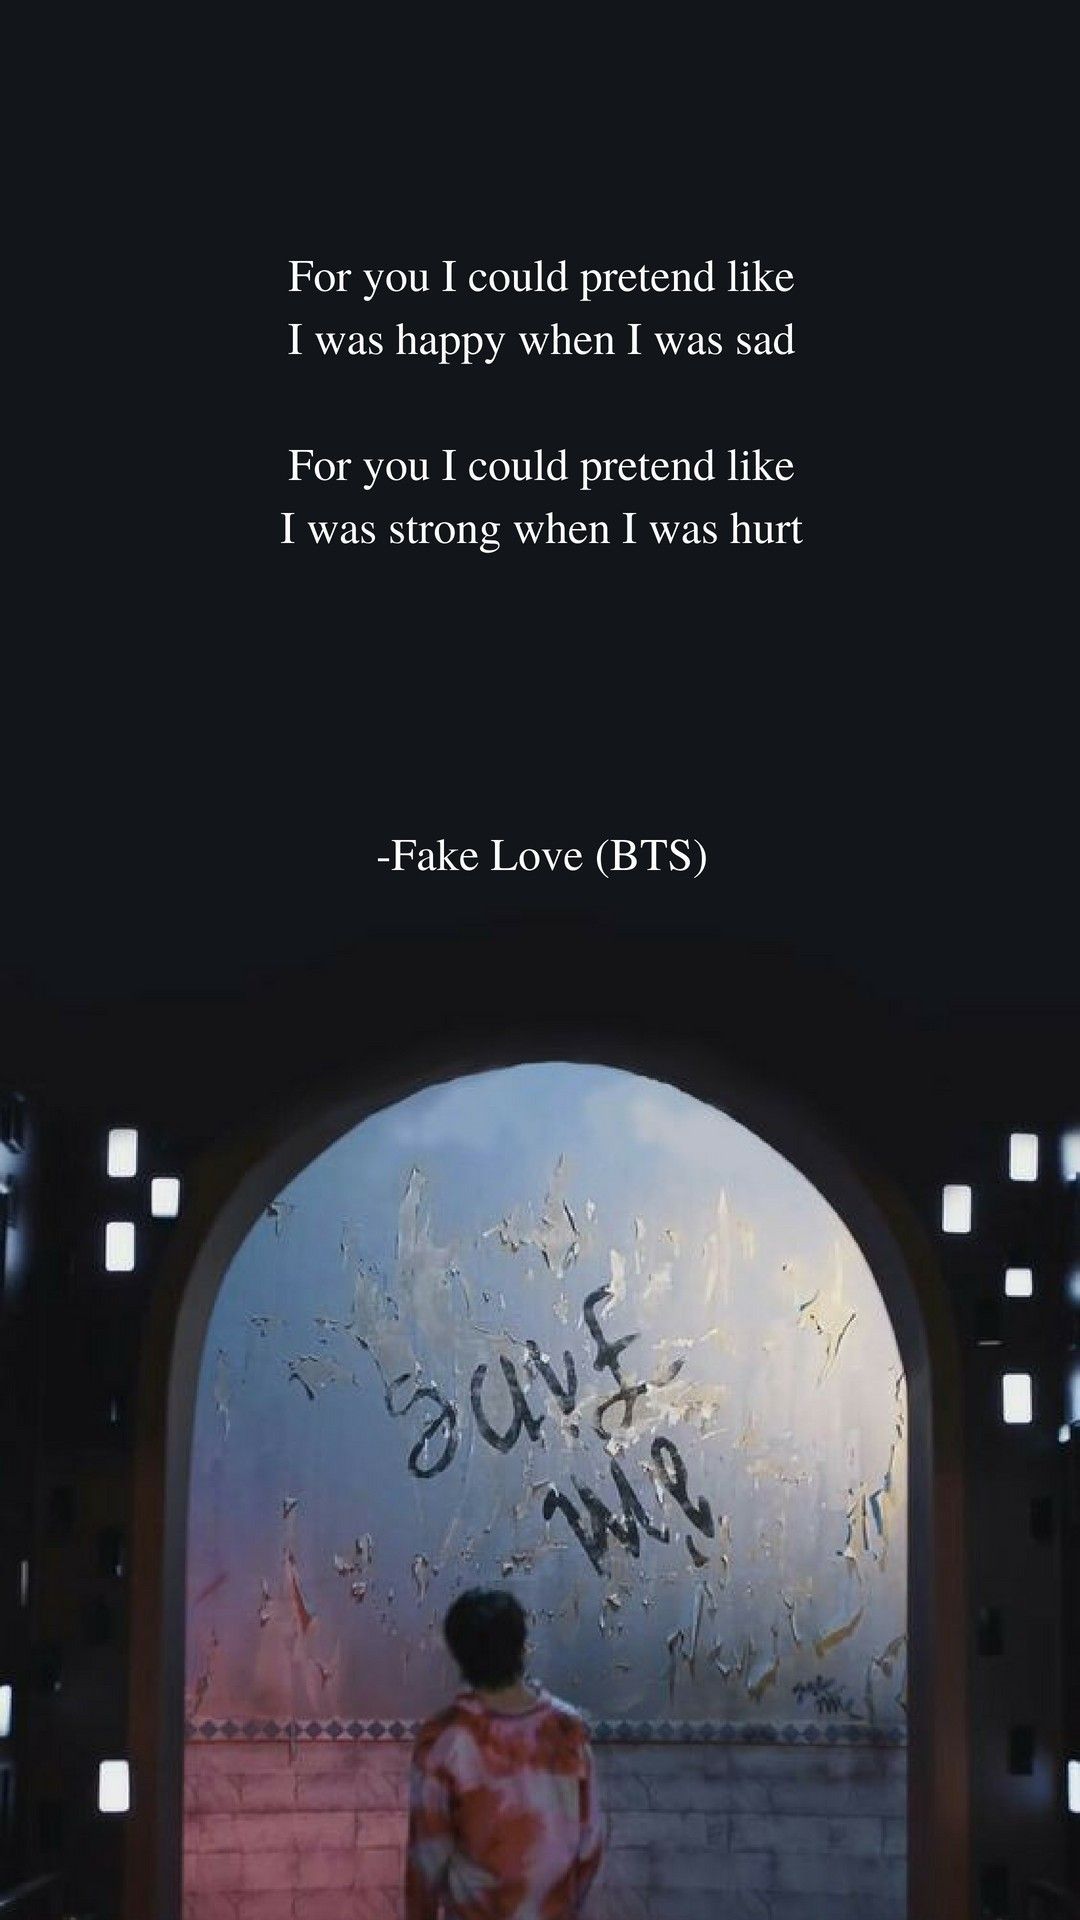 Bts quote wallpapers | ARMY's Amino